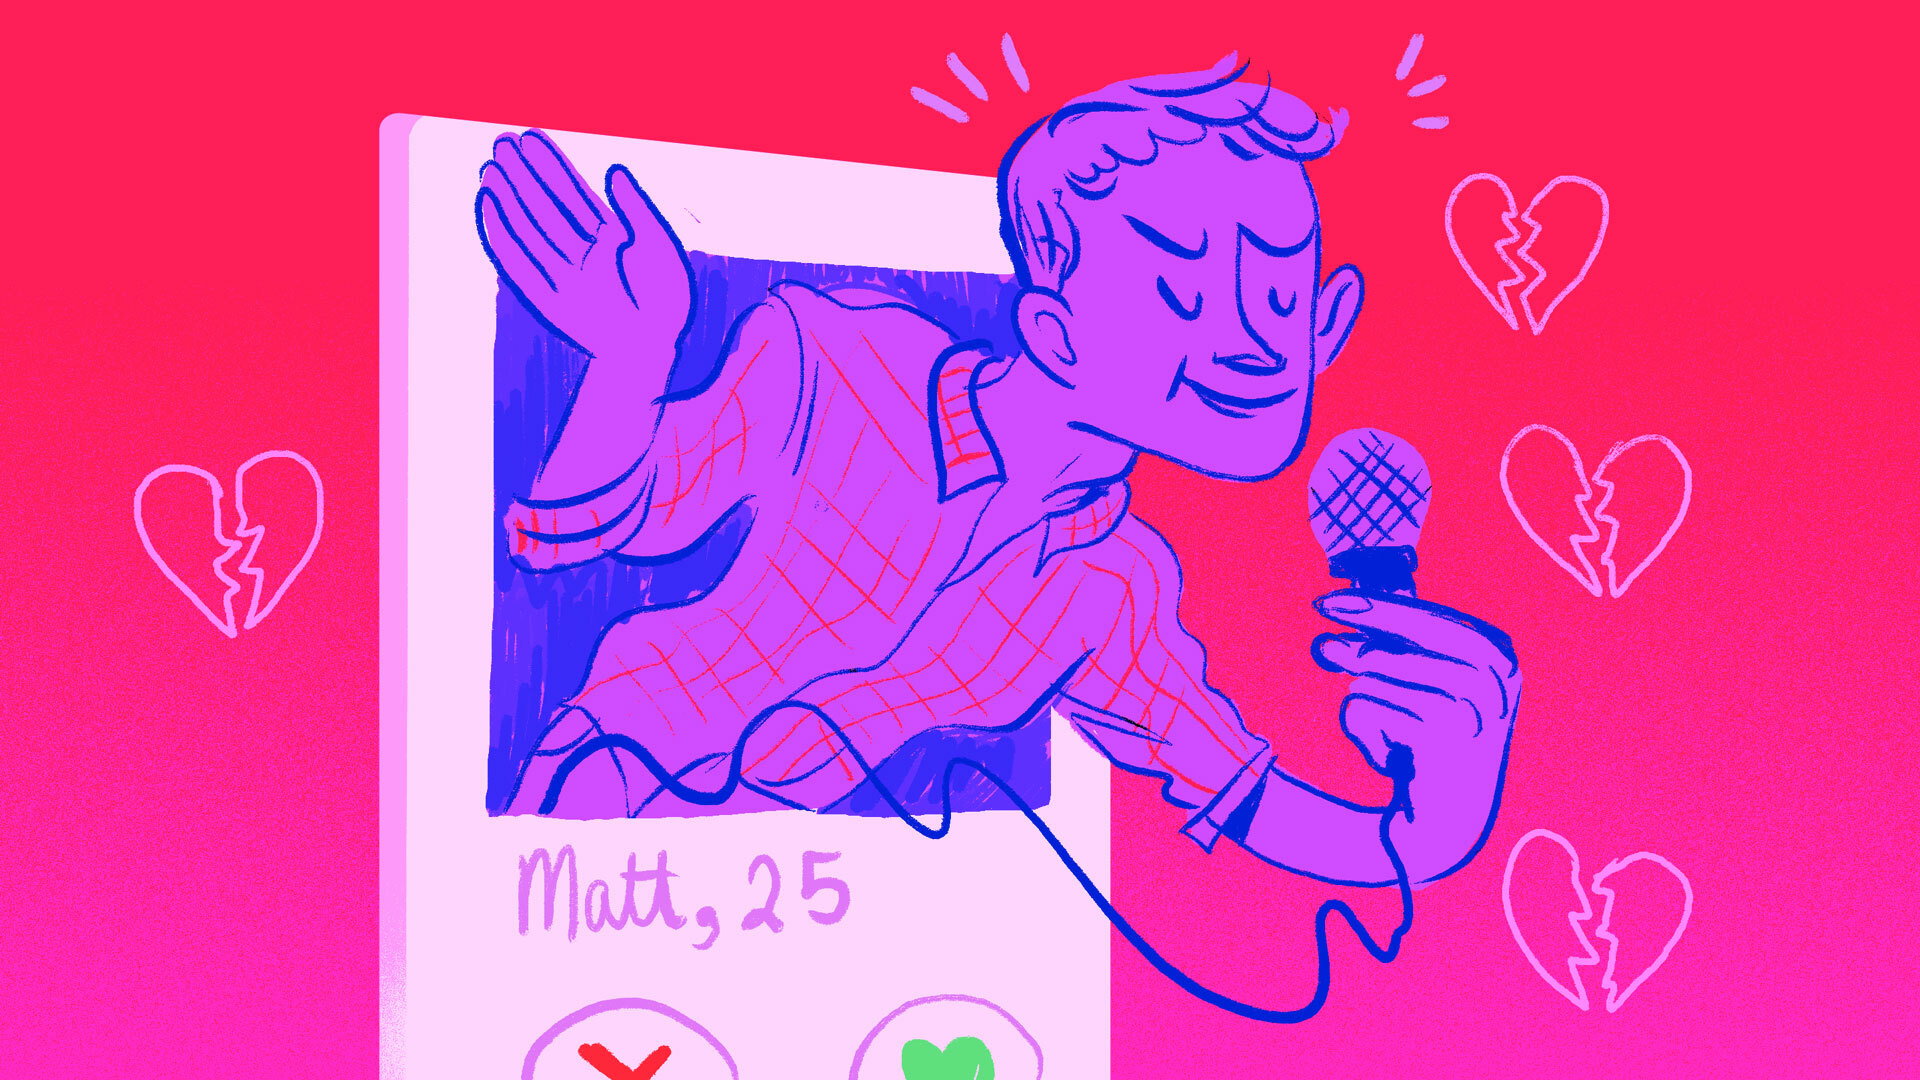 illustration of man emerging from dating app profile holding a microphone